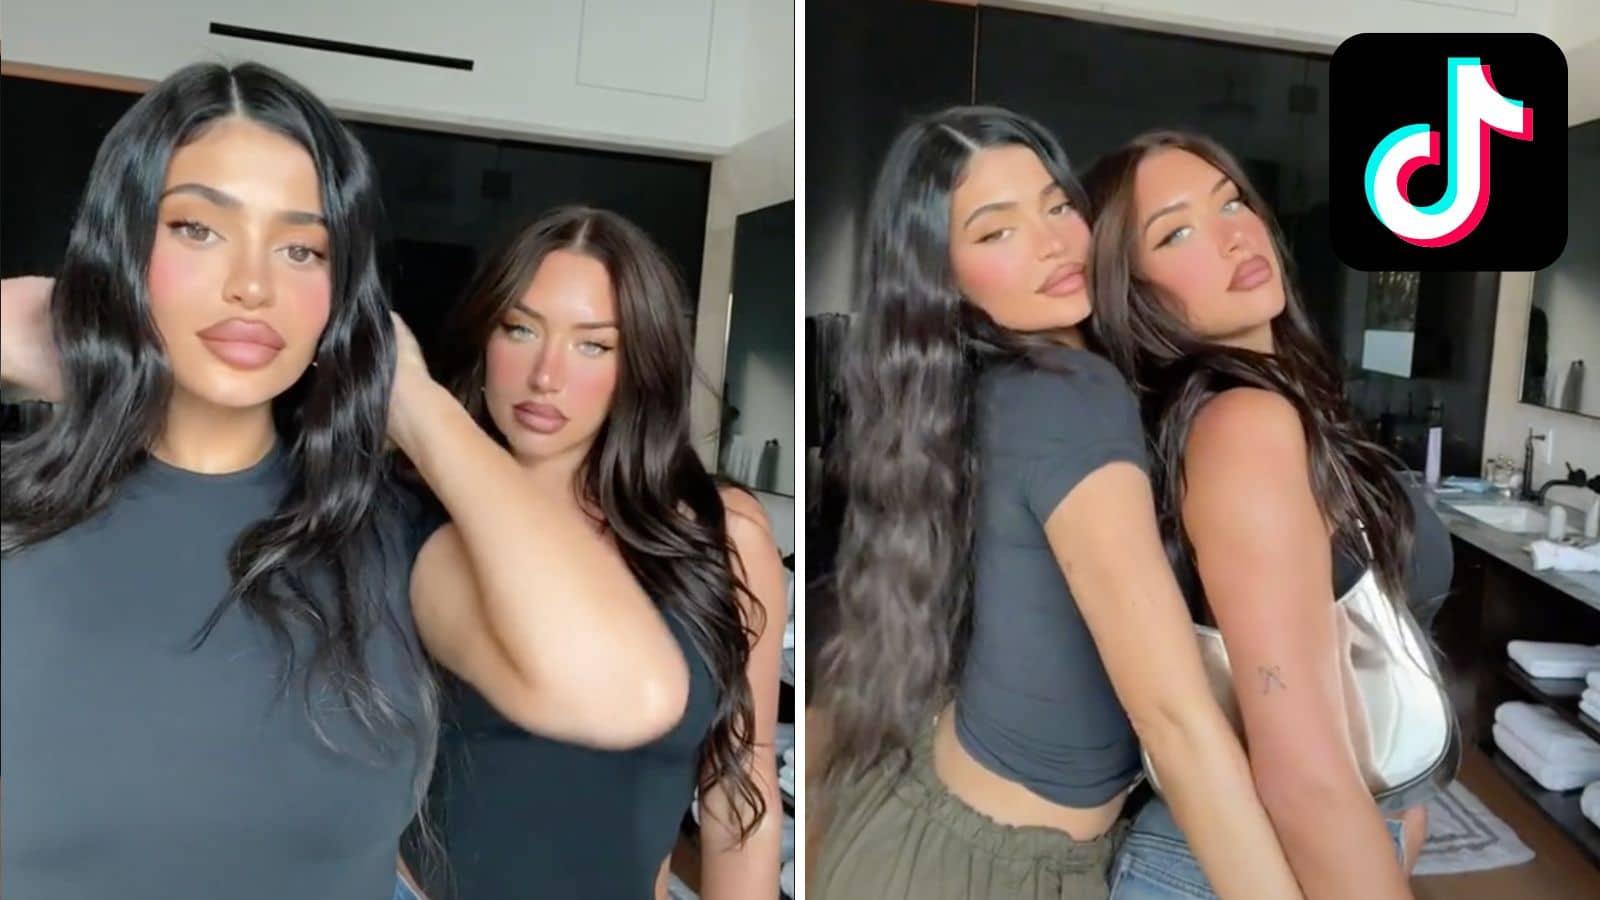 Kylie Jenner and friend posing